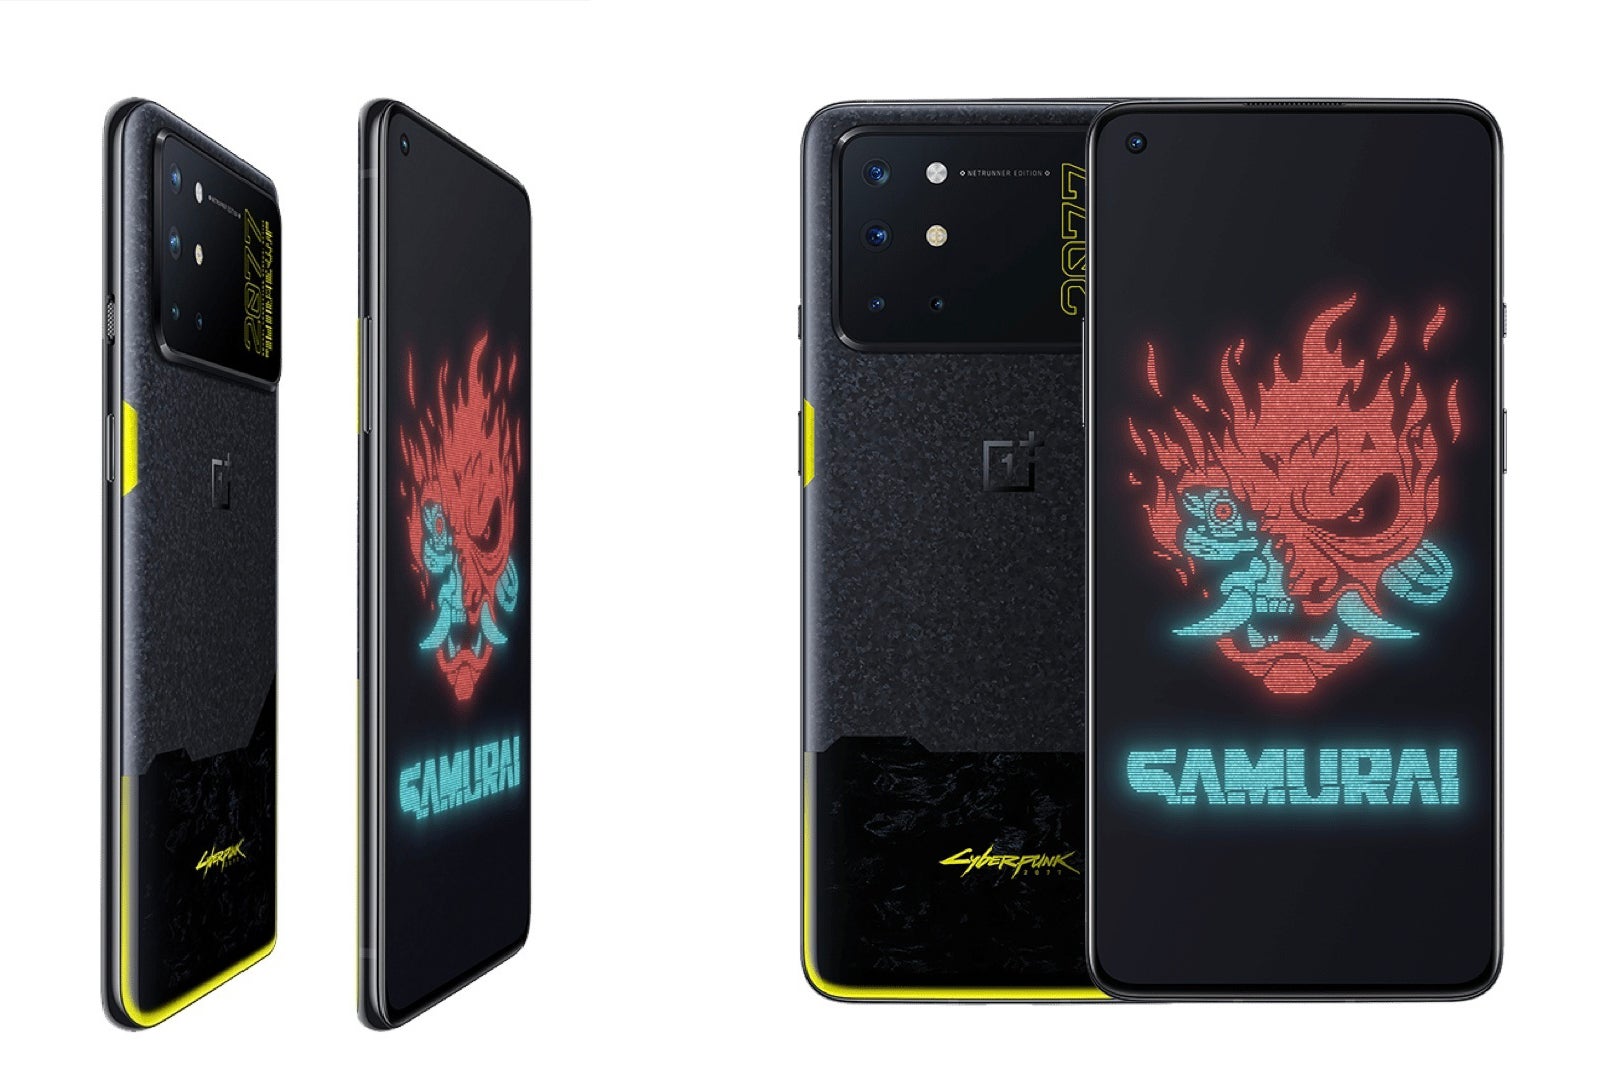 The crazy OnePlus 8T x Cyberpunk 2077 Edition is authentic, yet you can't have it